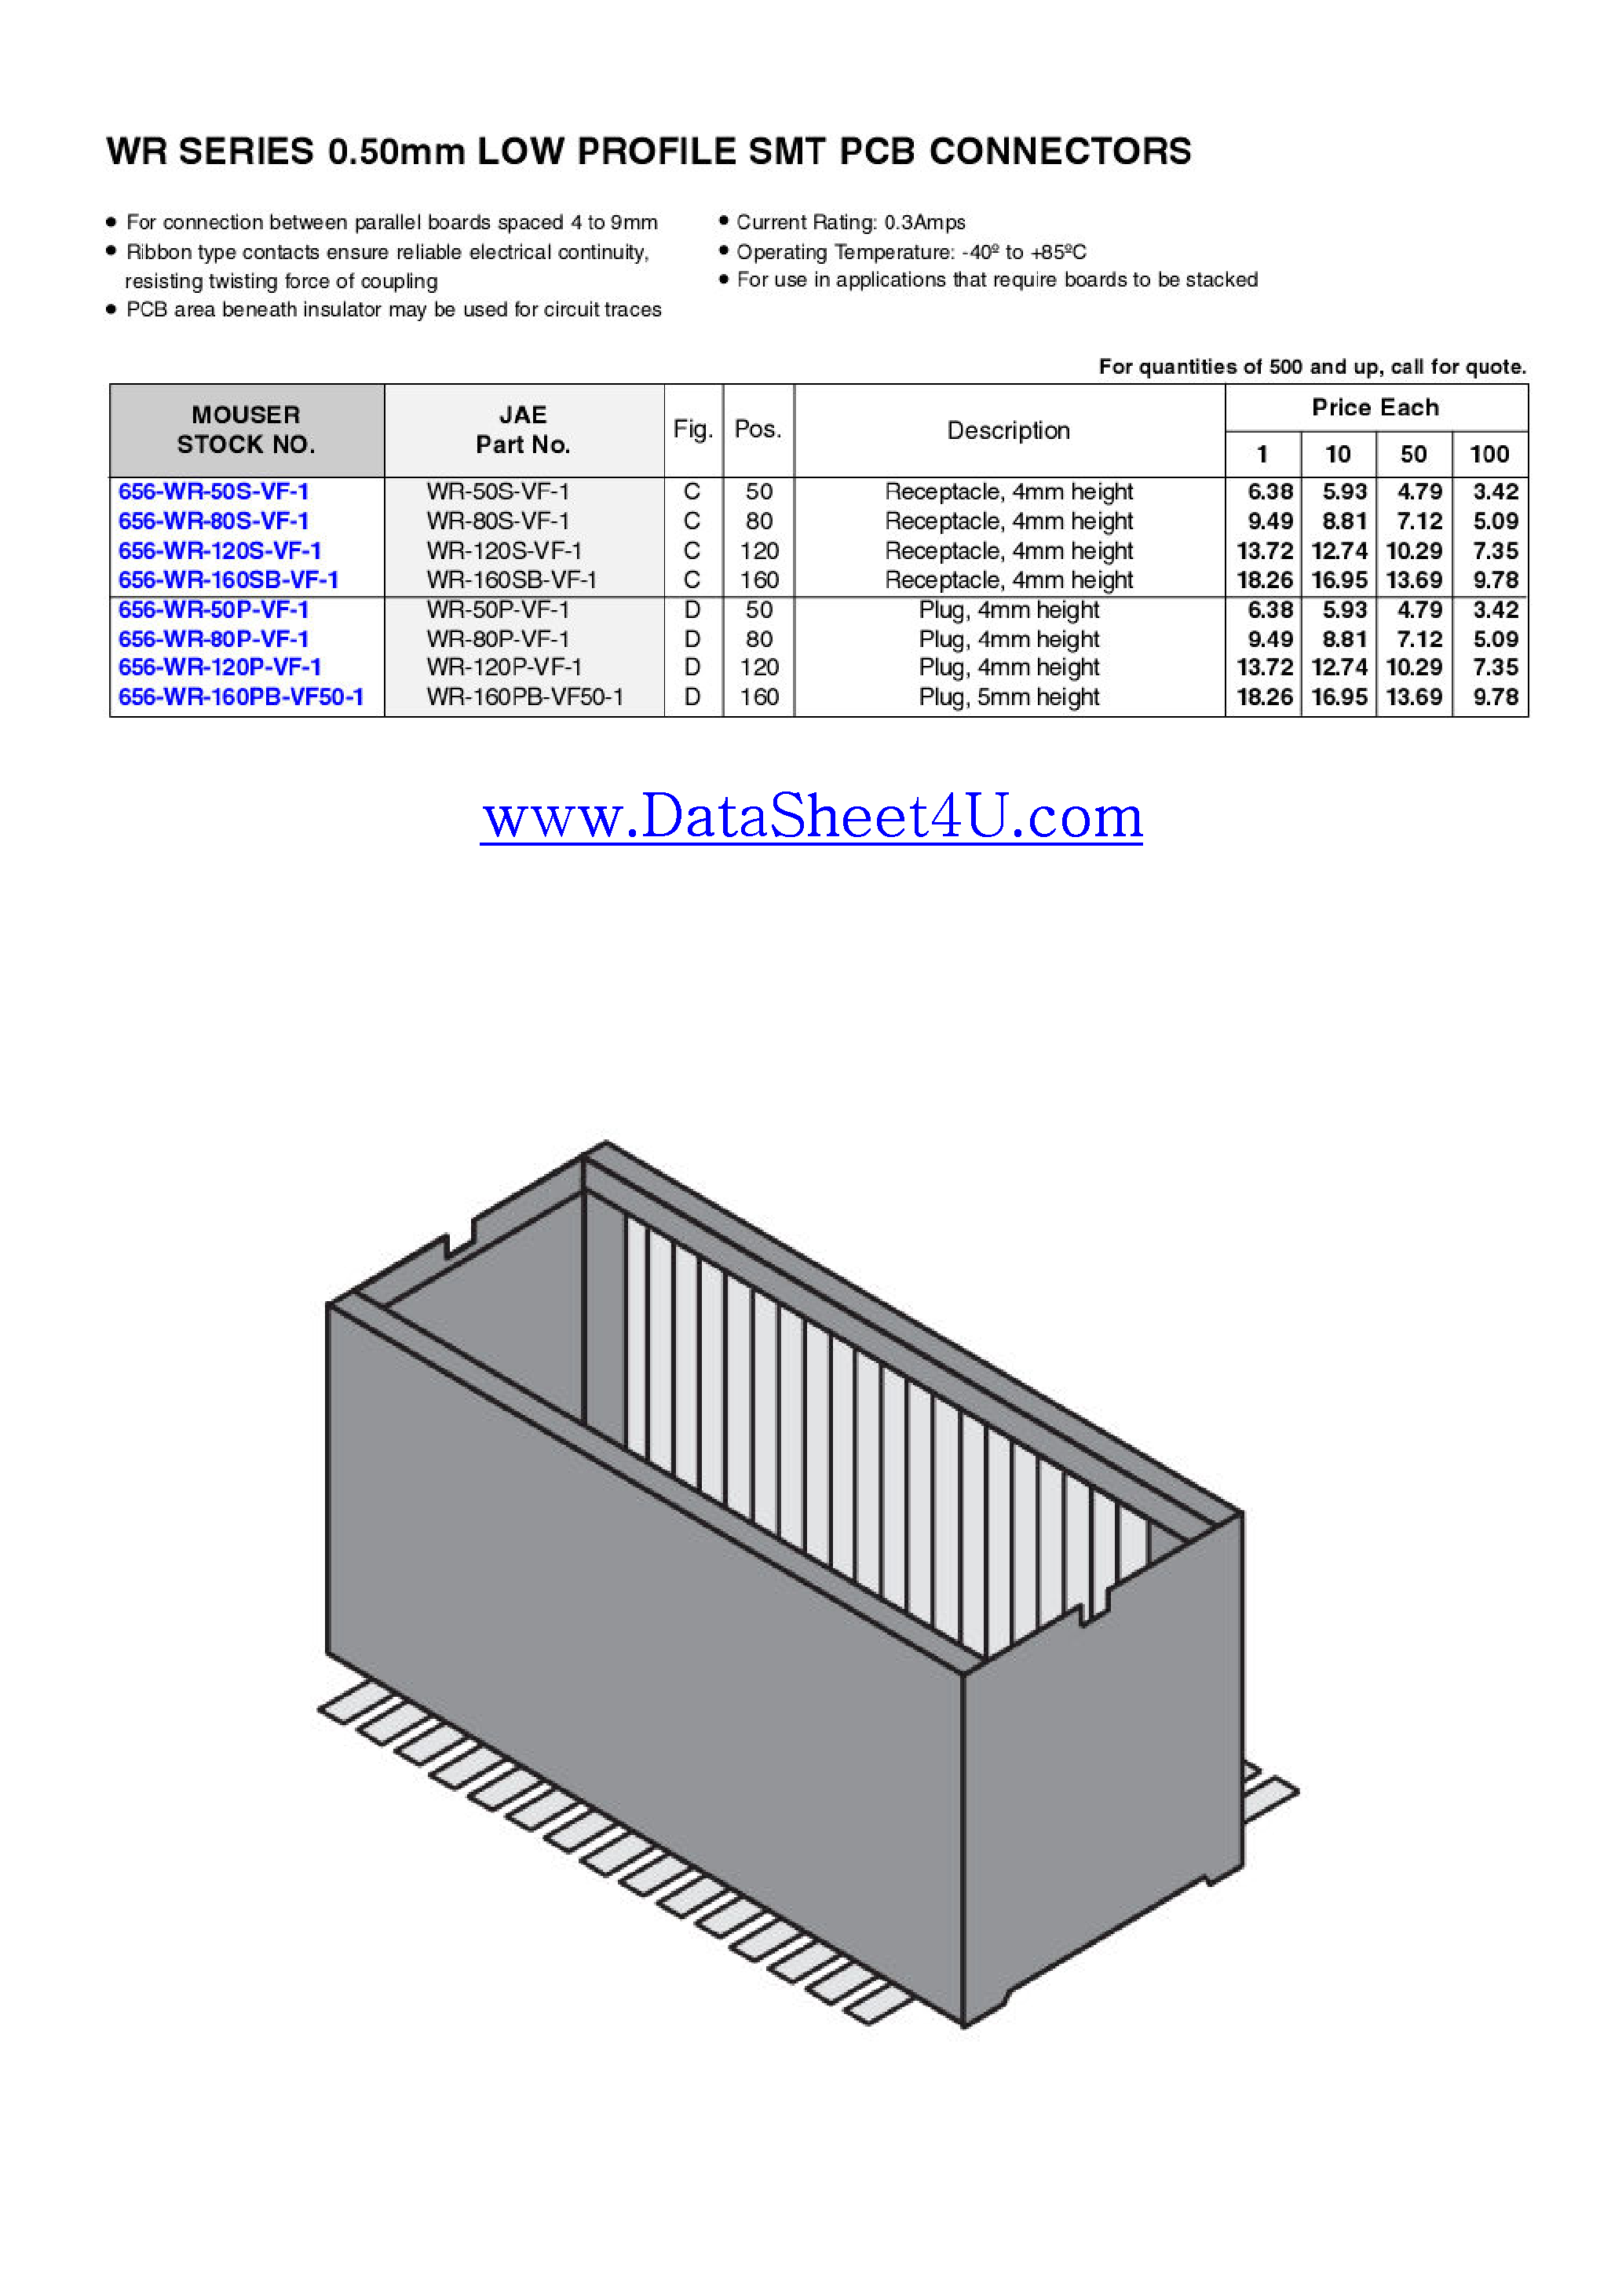 Datasheet WR-160PB-VF50 - WR Series 0.5mm Low Profile SMT PCB Connectors page 1